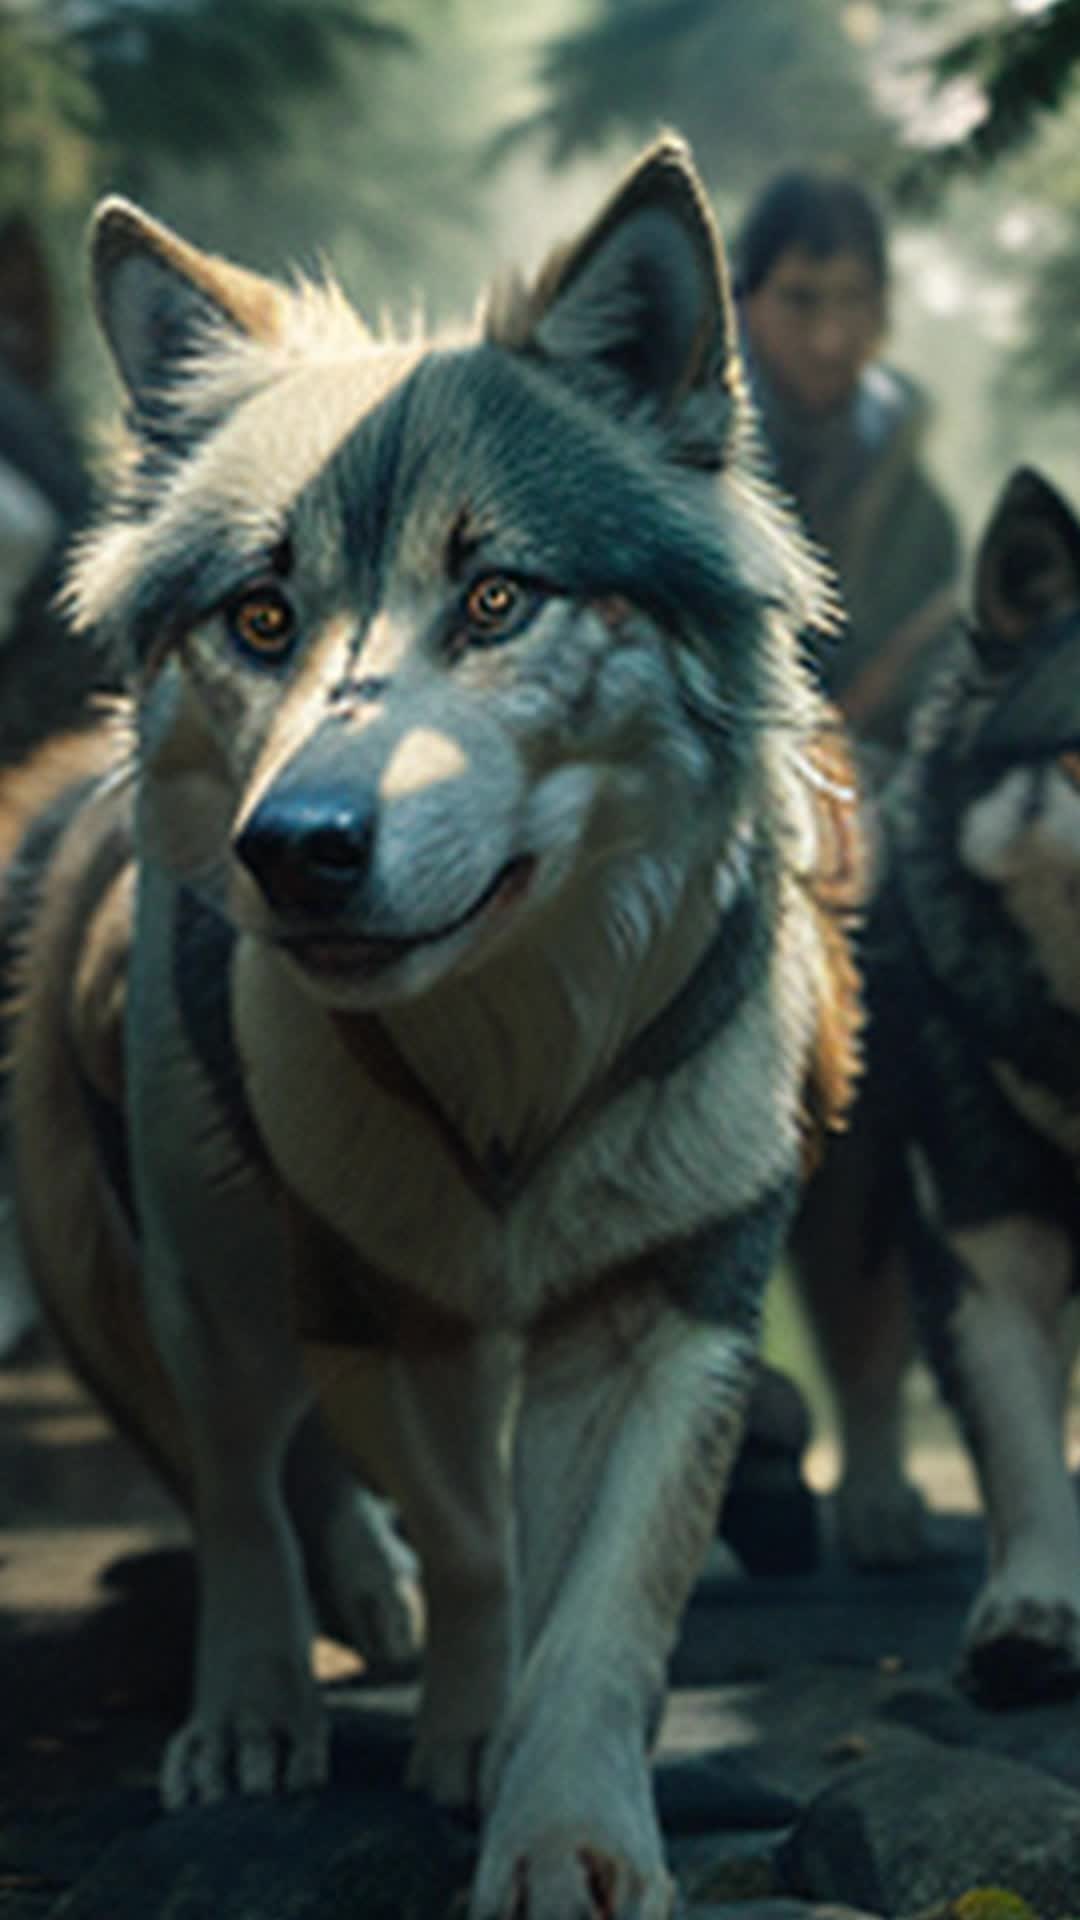 Legendary Okami wolf leading group of weary travelers through dense forest, travelers' faces showing relief, ethereal creature guiding, detailed, sharp focus